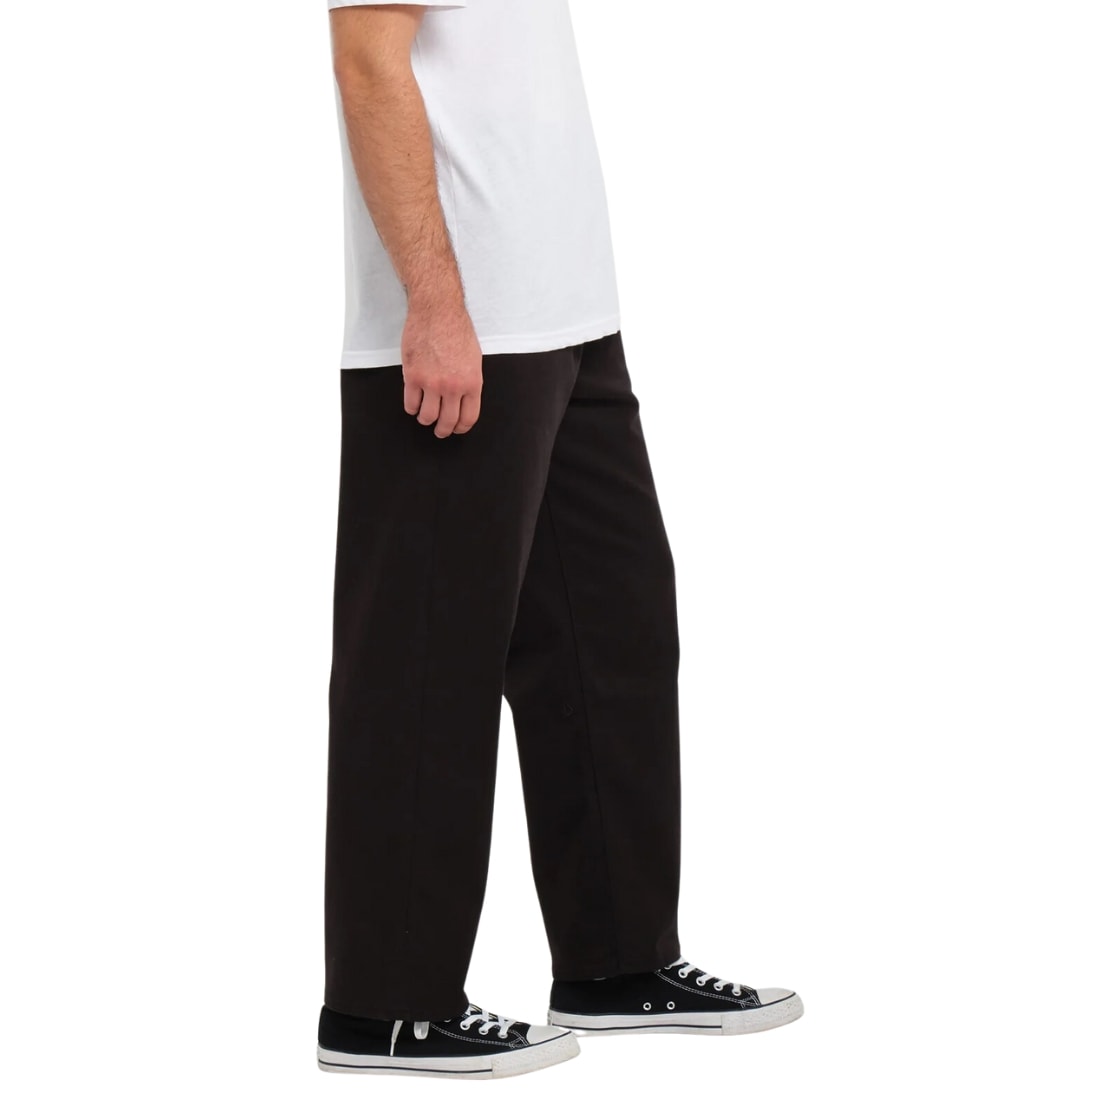 Volcom Outer Spaced Casual Pant - Black - Mens Chino Pants/Trousers by Volcom